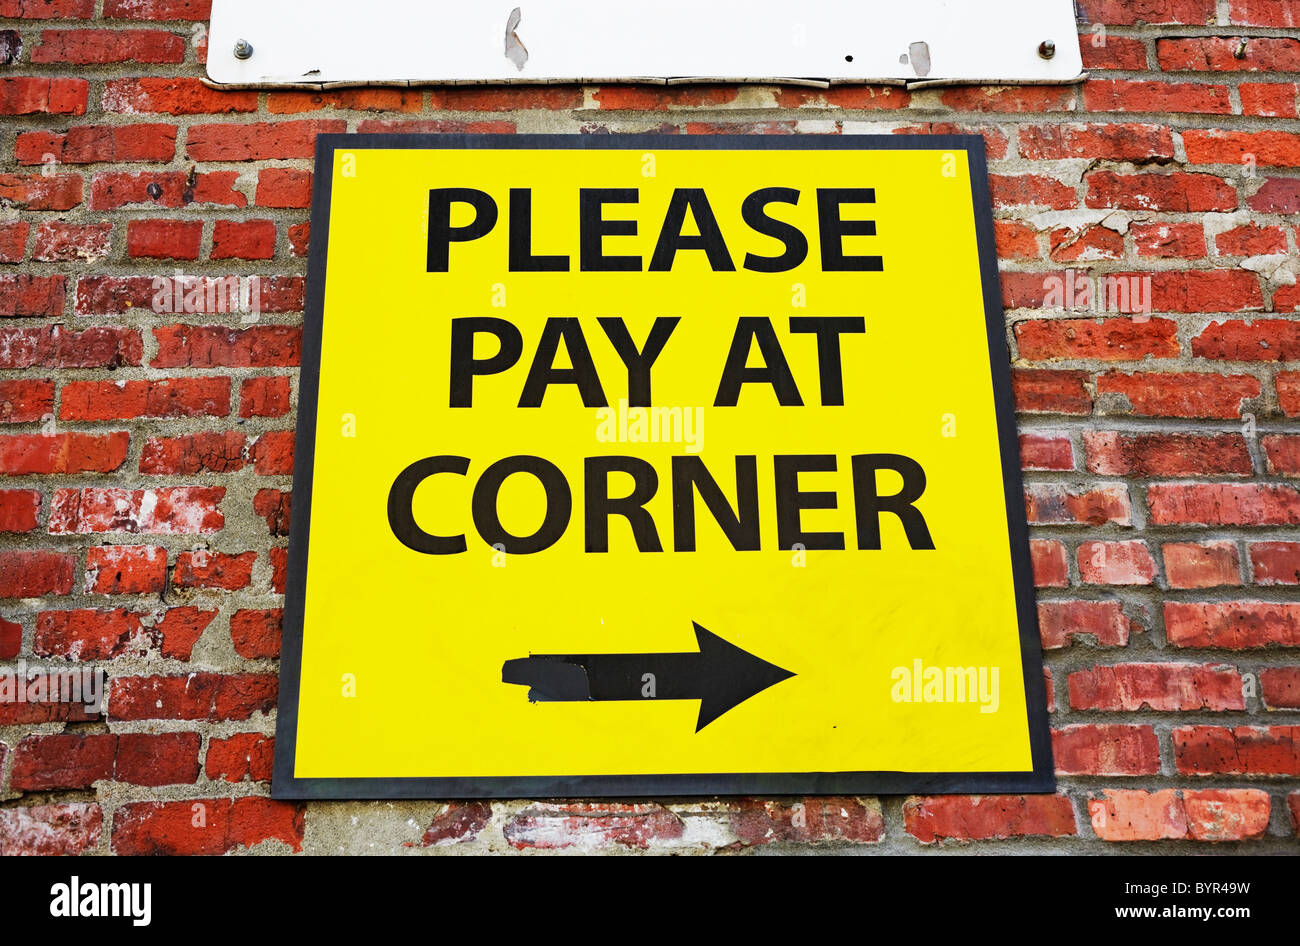 please pay at corner sign Stock Photo